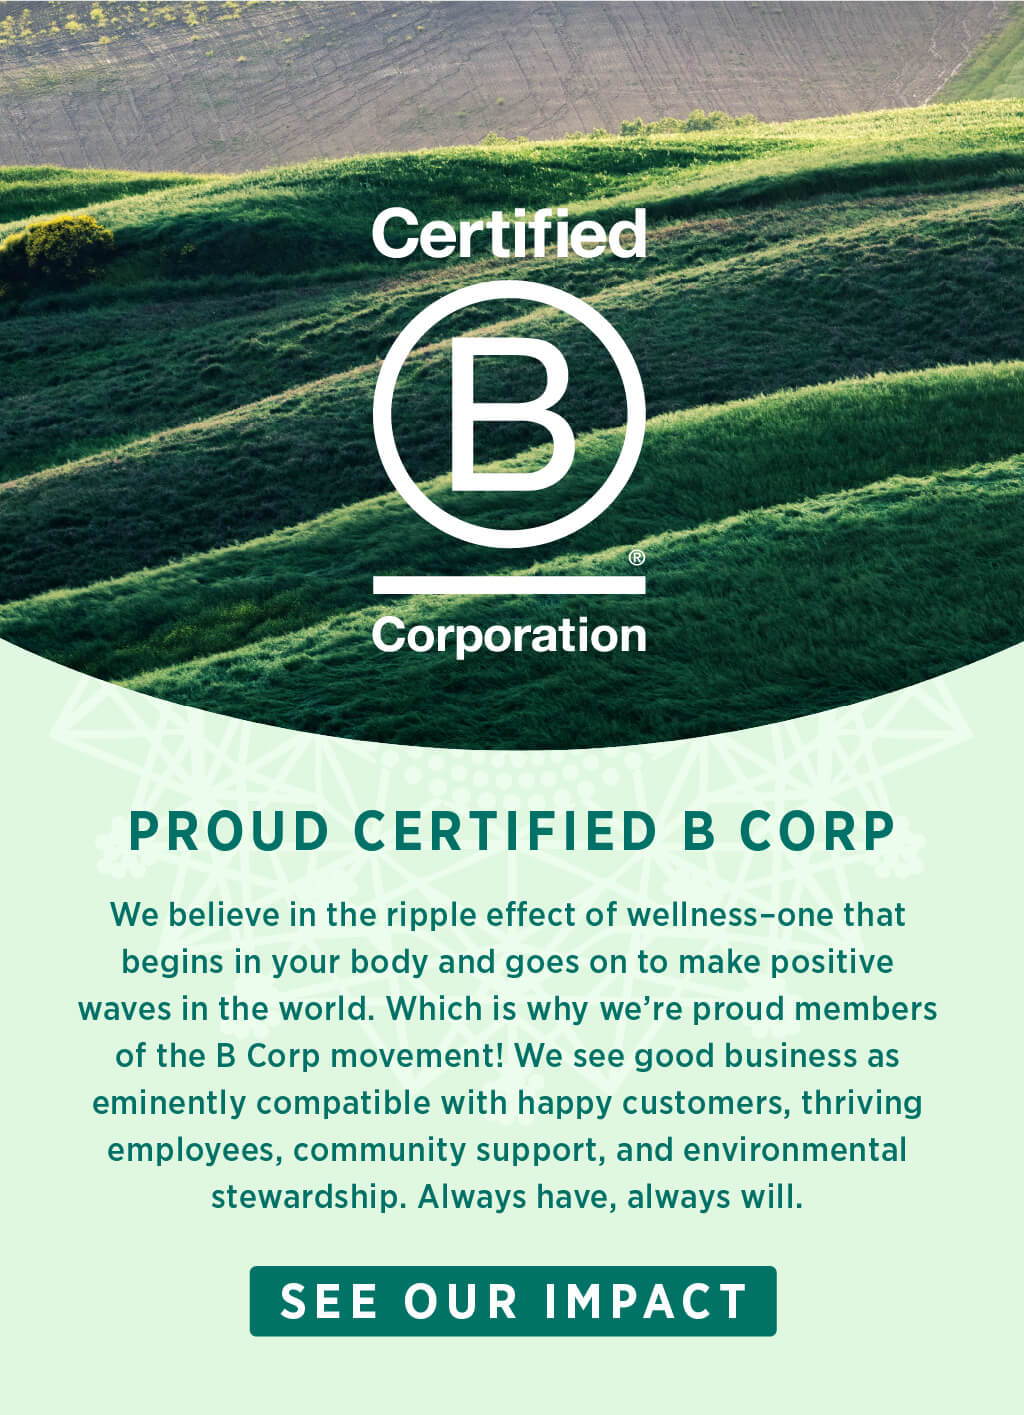 We believe good business is eminently compatible with thriving employees, community support, and environmental stewardship. Which is why we’re proud members of the B Corp movement. 